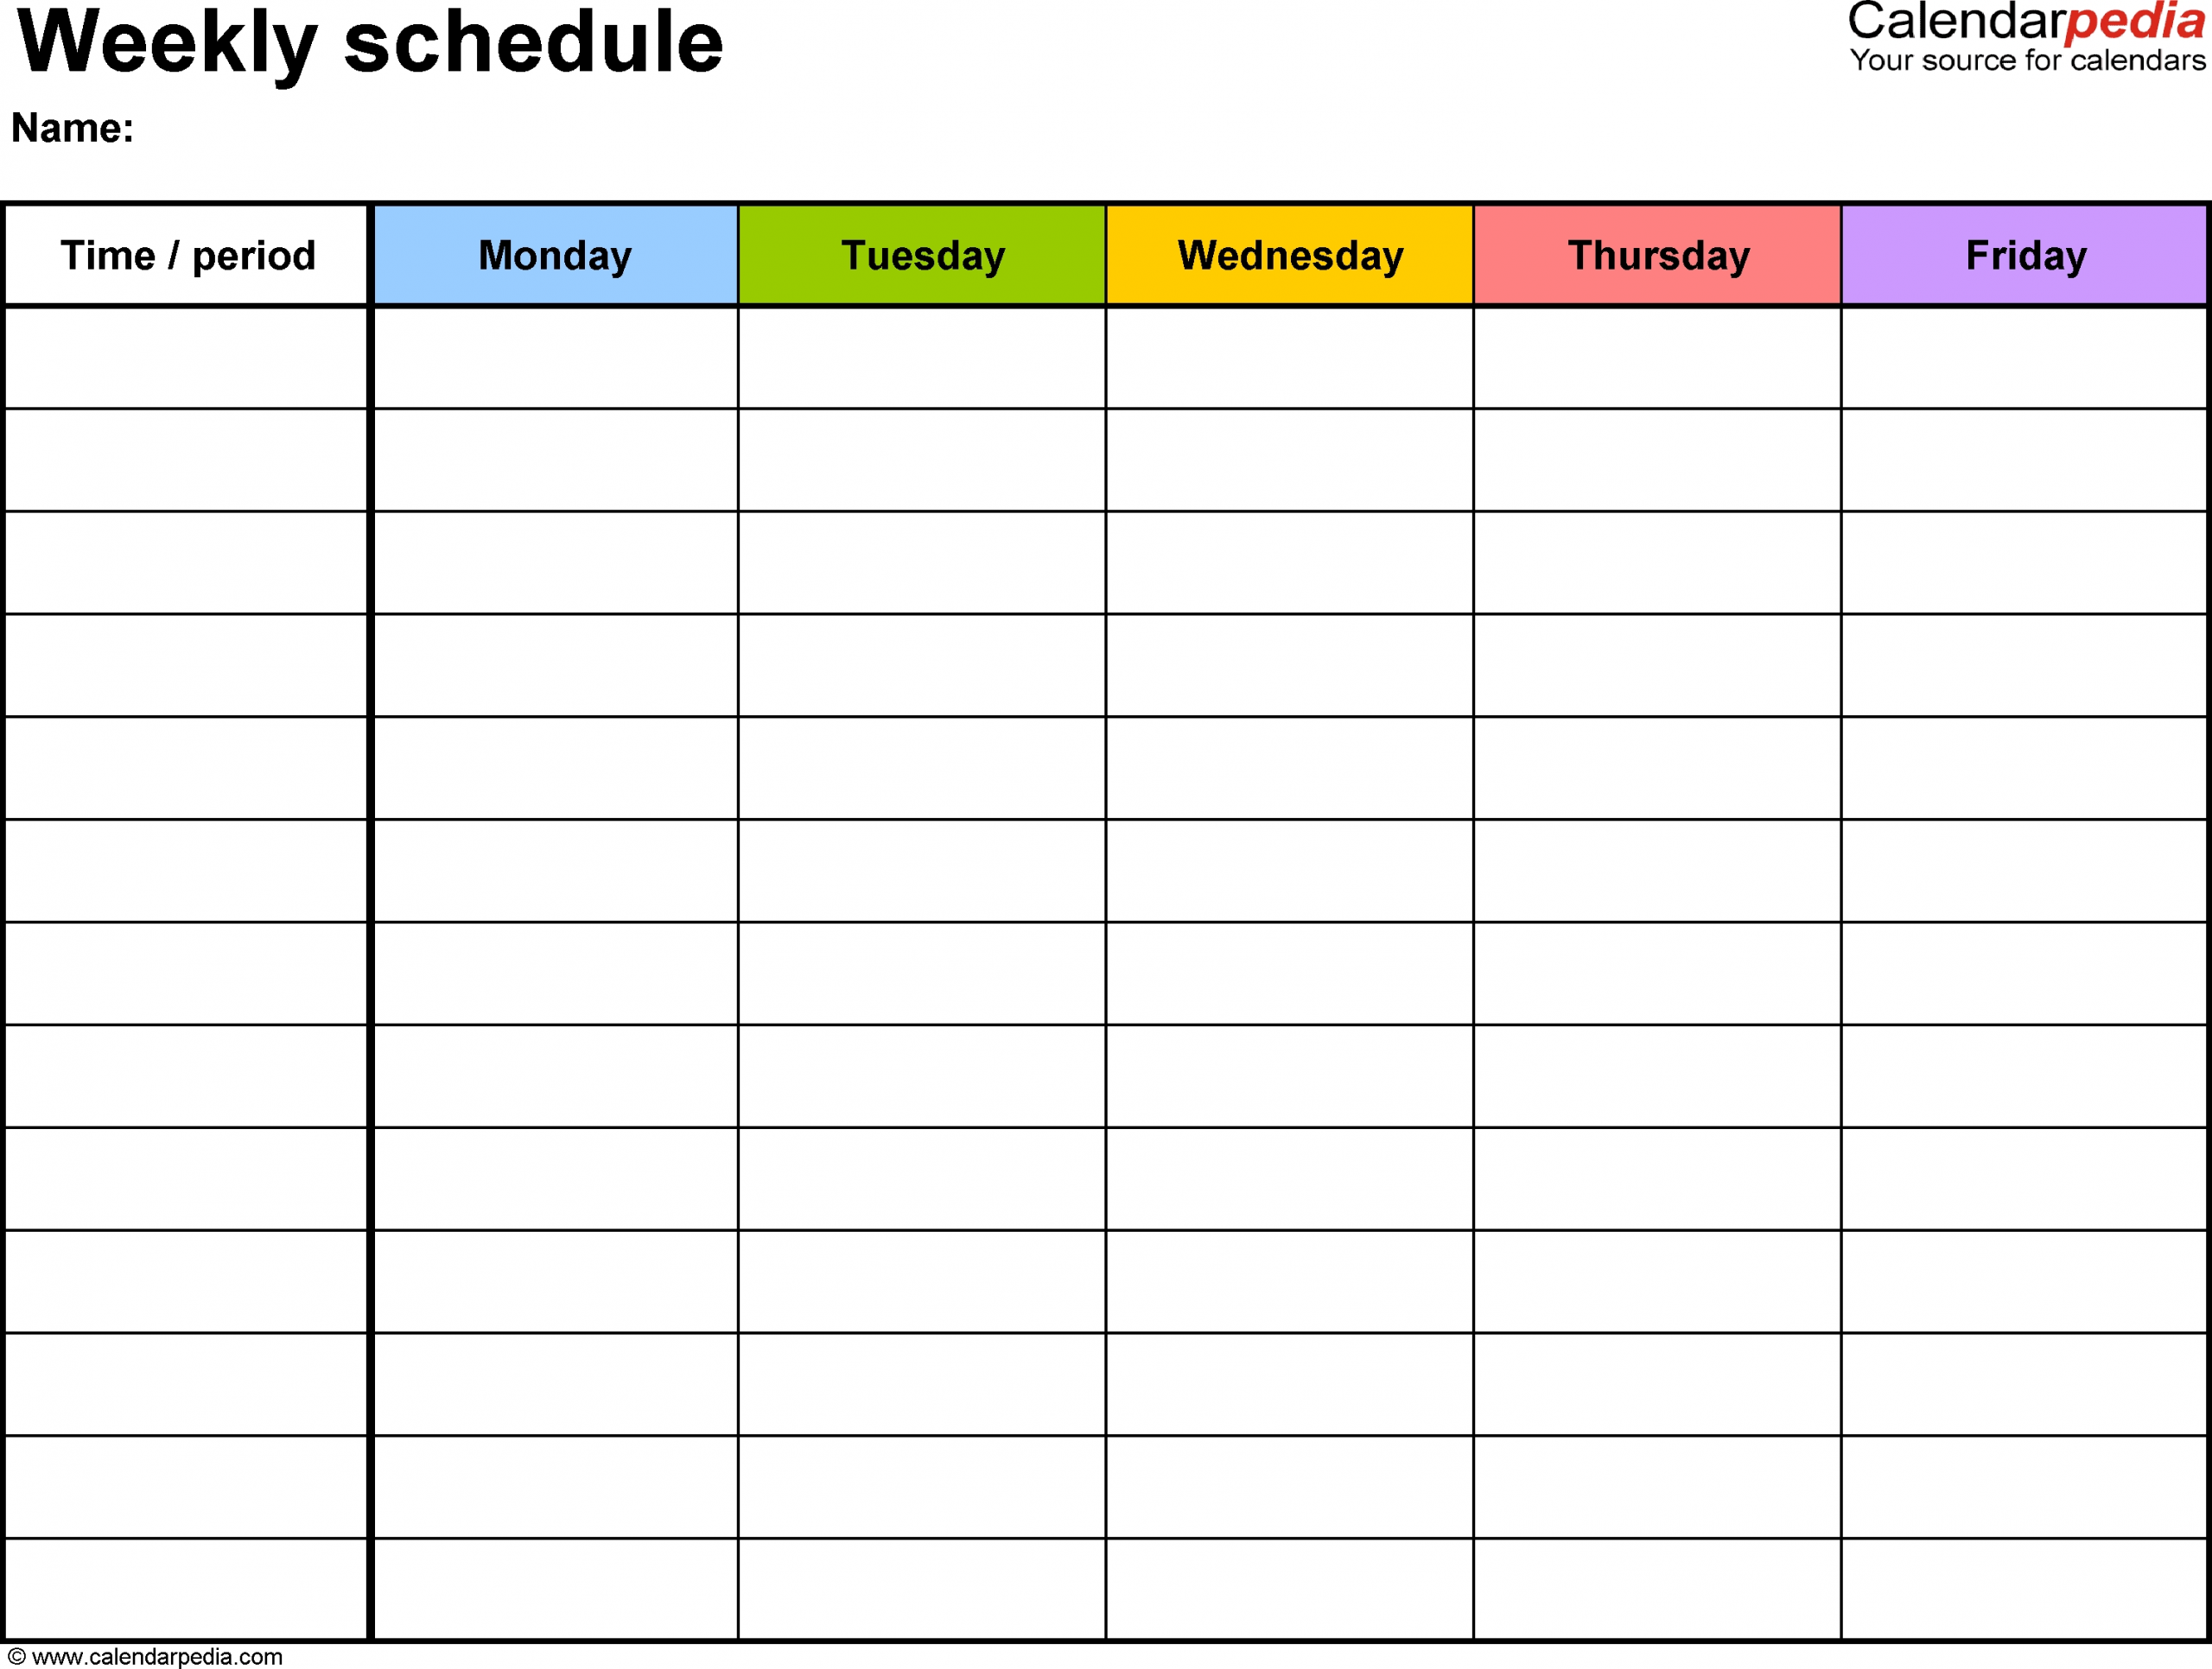 Free Weekly Schedule Templates For Word - 18 Templates with Blank Calendar For This Week